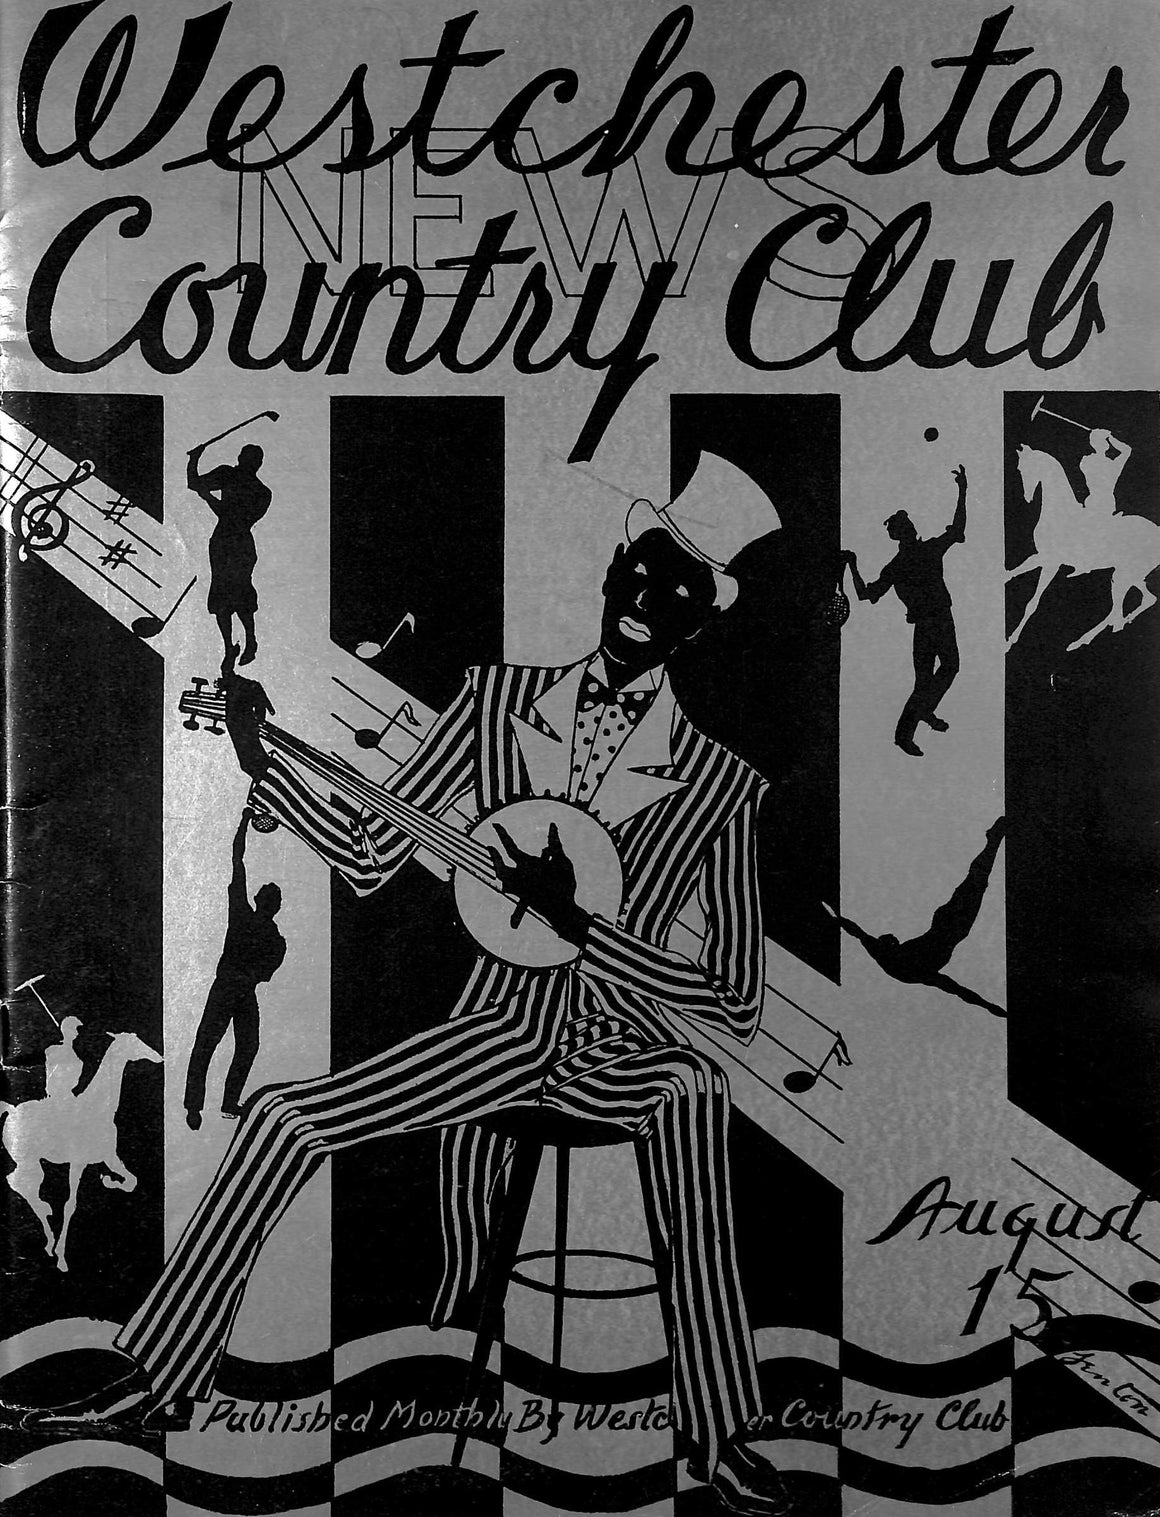 "Westchester County Club August 15 1936" 1936